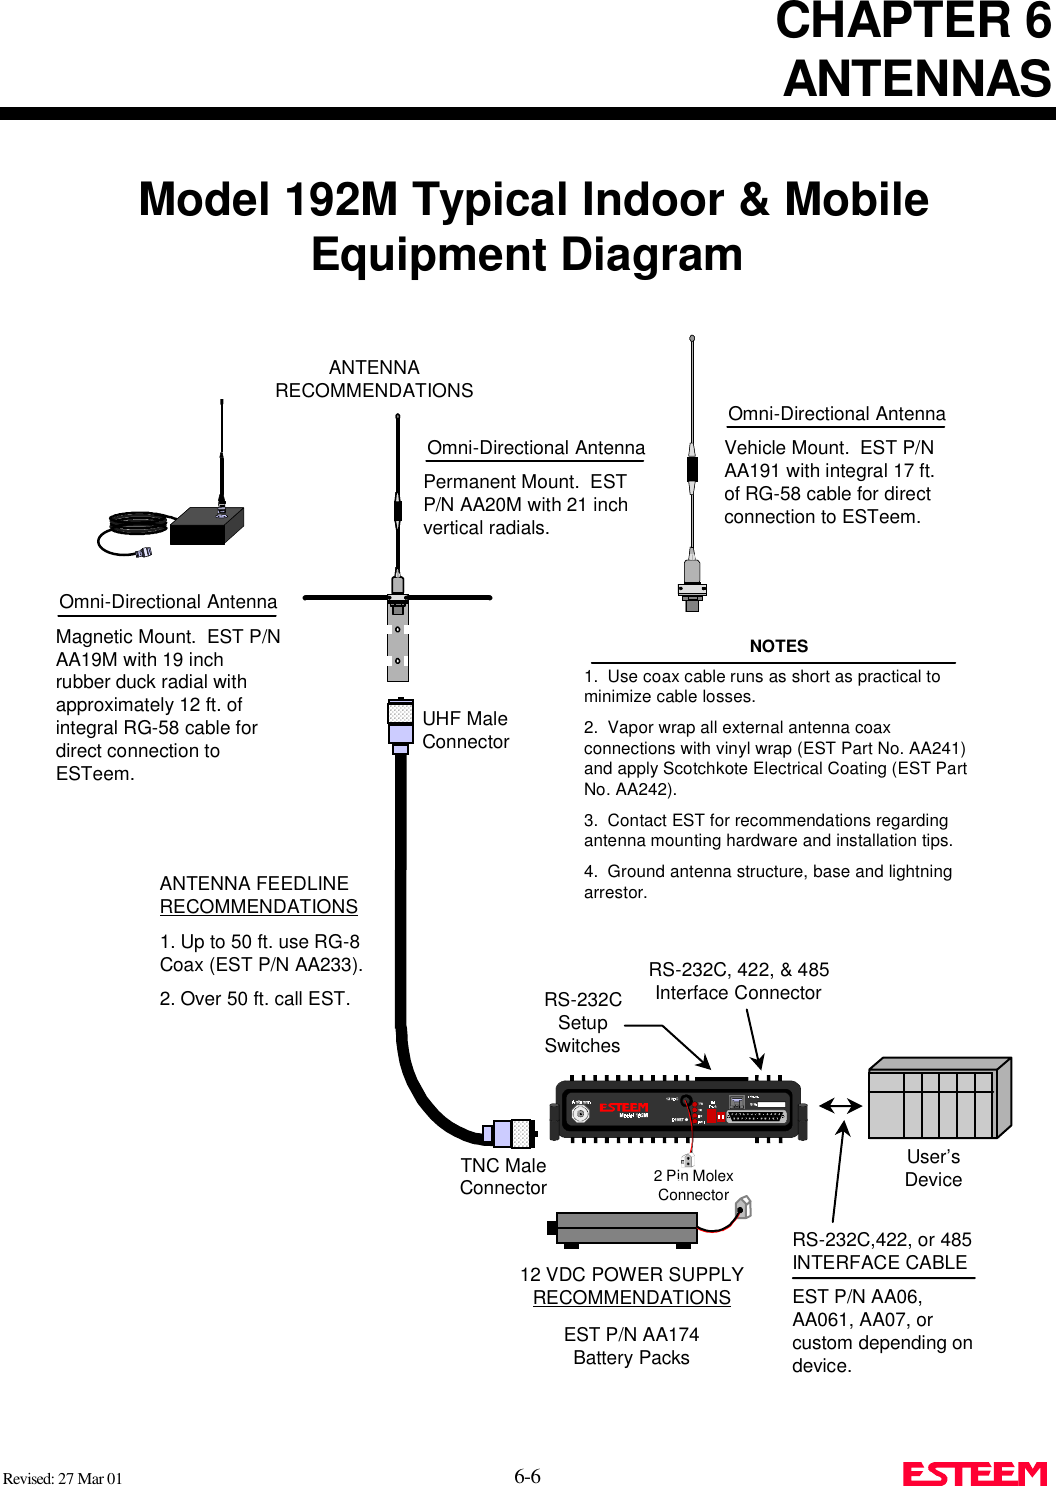 CHAPTER 6ANTENNASRevised: 27 Mar 01 6-6 Model 192M Typical Indoor &amp; MobileEquipment DiagramOmni-Directional AntennaMagnetic Mount.  EST P/NAA19M with 19 inchrubber duck radial withapproximately 12 ft. ofintegral RG-58 cable fordirect connection toESTeem.UHF MaleConnectorANTENNA FEEDLINERECOMMENDATIONS1. Up to 50 ft. use RG-8Coax (EST P/N AA233).2. Over 50 ft. call EST.TNC MaleConnector12 VDC POWER SUPPLYRECOMMENDATIONSEST P/N AA174Battery Packs2 Pin MolexConnectorUser’sDeviceRS-232CSetupSwitchesRS-232C, 422, &amp; 485Interface ConnectorOmni-Directional AntennaPermanent Mount.  ESTP/N AA20M with 21 inchvertical radials.RS-232C,422, or 485INTERFACE CABLEEST P/N AA06,AA061, AA07, orcustom depending ondevice.ANTENNARECOMMENDATIONSNOTES1.  Use coax cable runs as short as practical tominimize cable losses.2.  Vapor wrap all external antenna coaxconnections with vinyl wrap (EST Part No. AA241)and apply Scotchkote Electrical Coating (EST PartNo. AA242).3.  Contact EST for recommendations regardingantenna mounting hardware and installation tips.4.  Ground antenna structure, base and lightningarrestor.Omni-Directional AntennaVehicle Mount.  EST P/NAA191 with integral 17 ft.of RG-58 cable for directconnection to ESTeem.